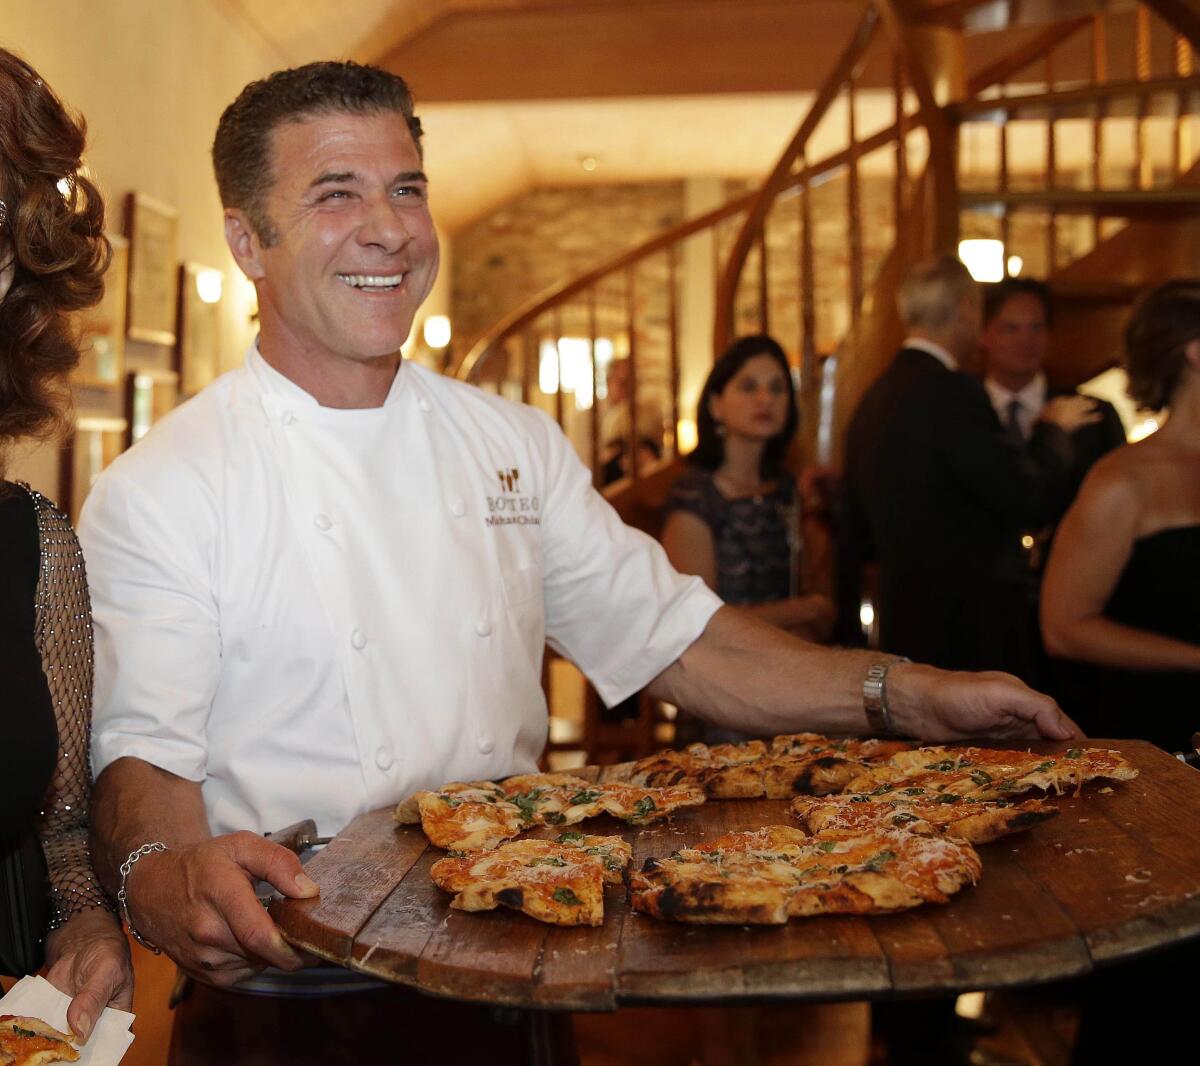 A smiling man holds a rustic wooden platter with slices of pizza.